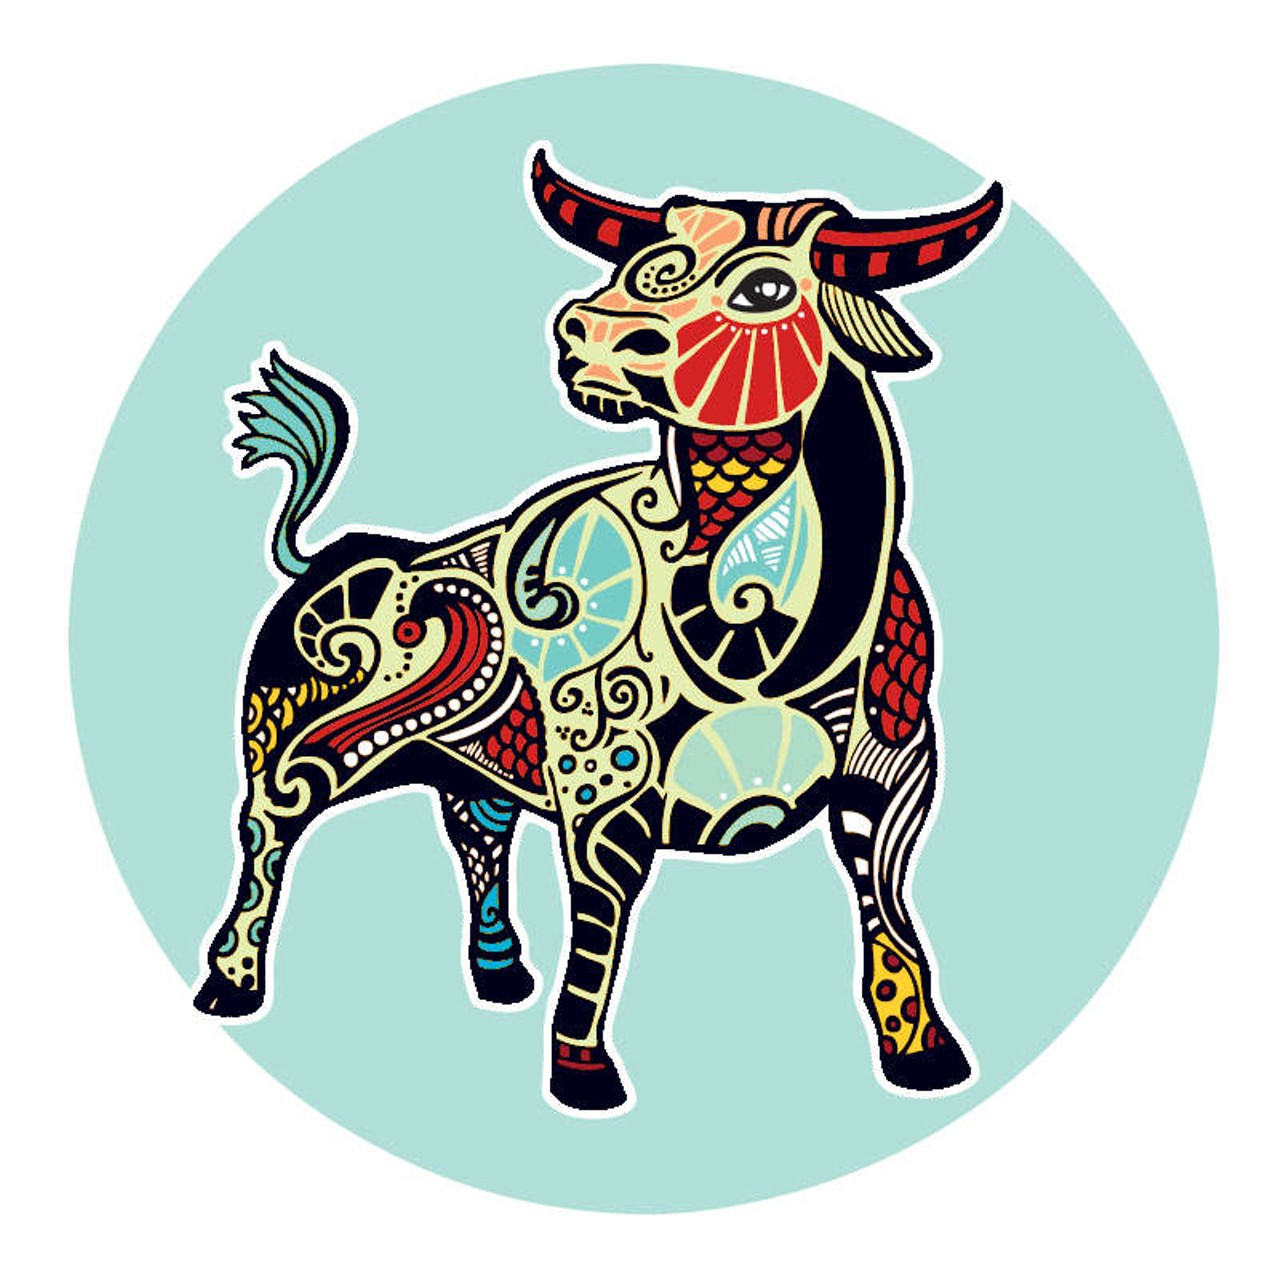 TAURUS (April 21 -May 20):
If you've got kids, that is what matters right now. No need to spell it out; bring your attention back home. If you're childless, this advice covers getting to the heart of your creative spark and honing it with the kind of dedication and sincerity that will turn straw into gold. On other fronts the intensity of things is beyond words. In the middle of things like this it is nearly impossible to get in touch with how it's actually affecting you. You won't have a handle on this for at least three years. Do your best to swim through it, don't get too analytical, and be as true to yourself as you can.